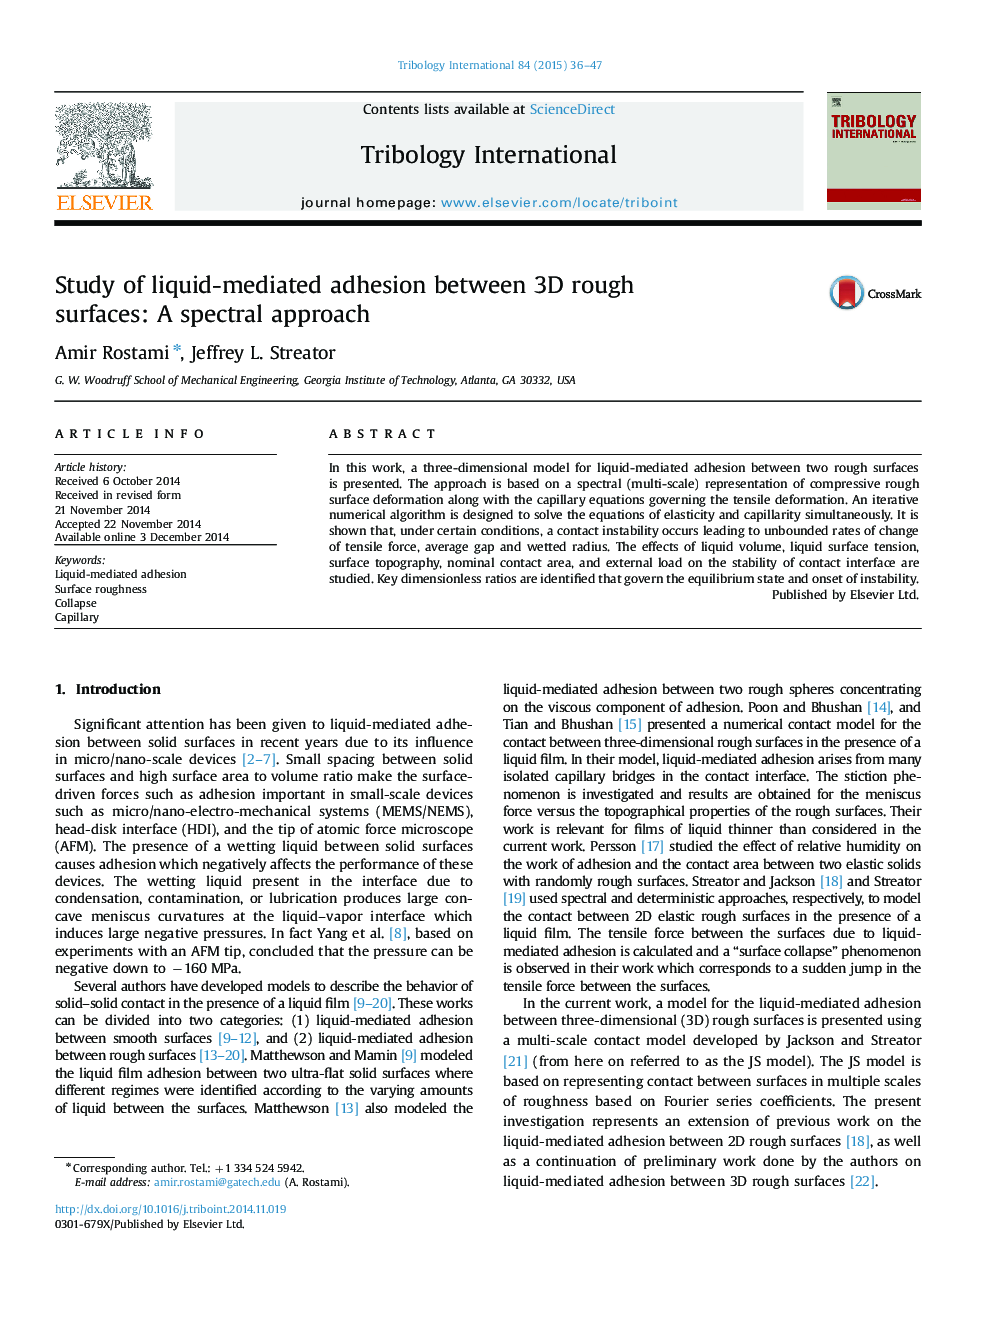 Study of liquid-mediated adhesion between 3D rough surfaces: A spectral approach